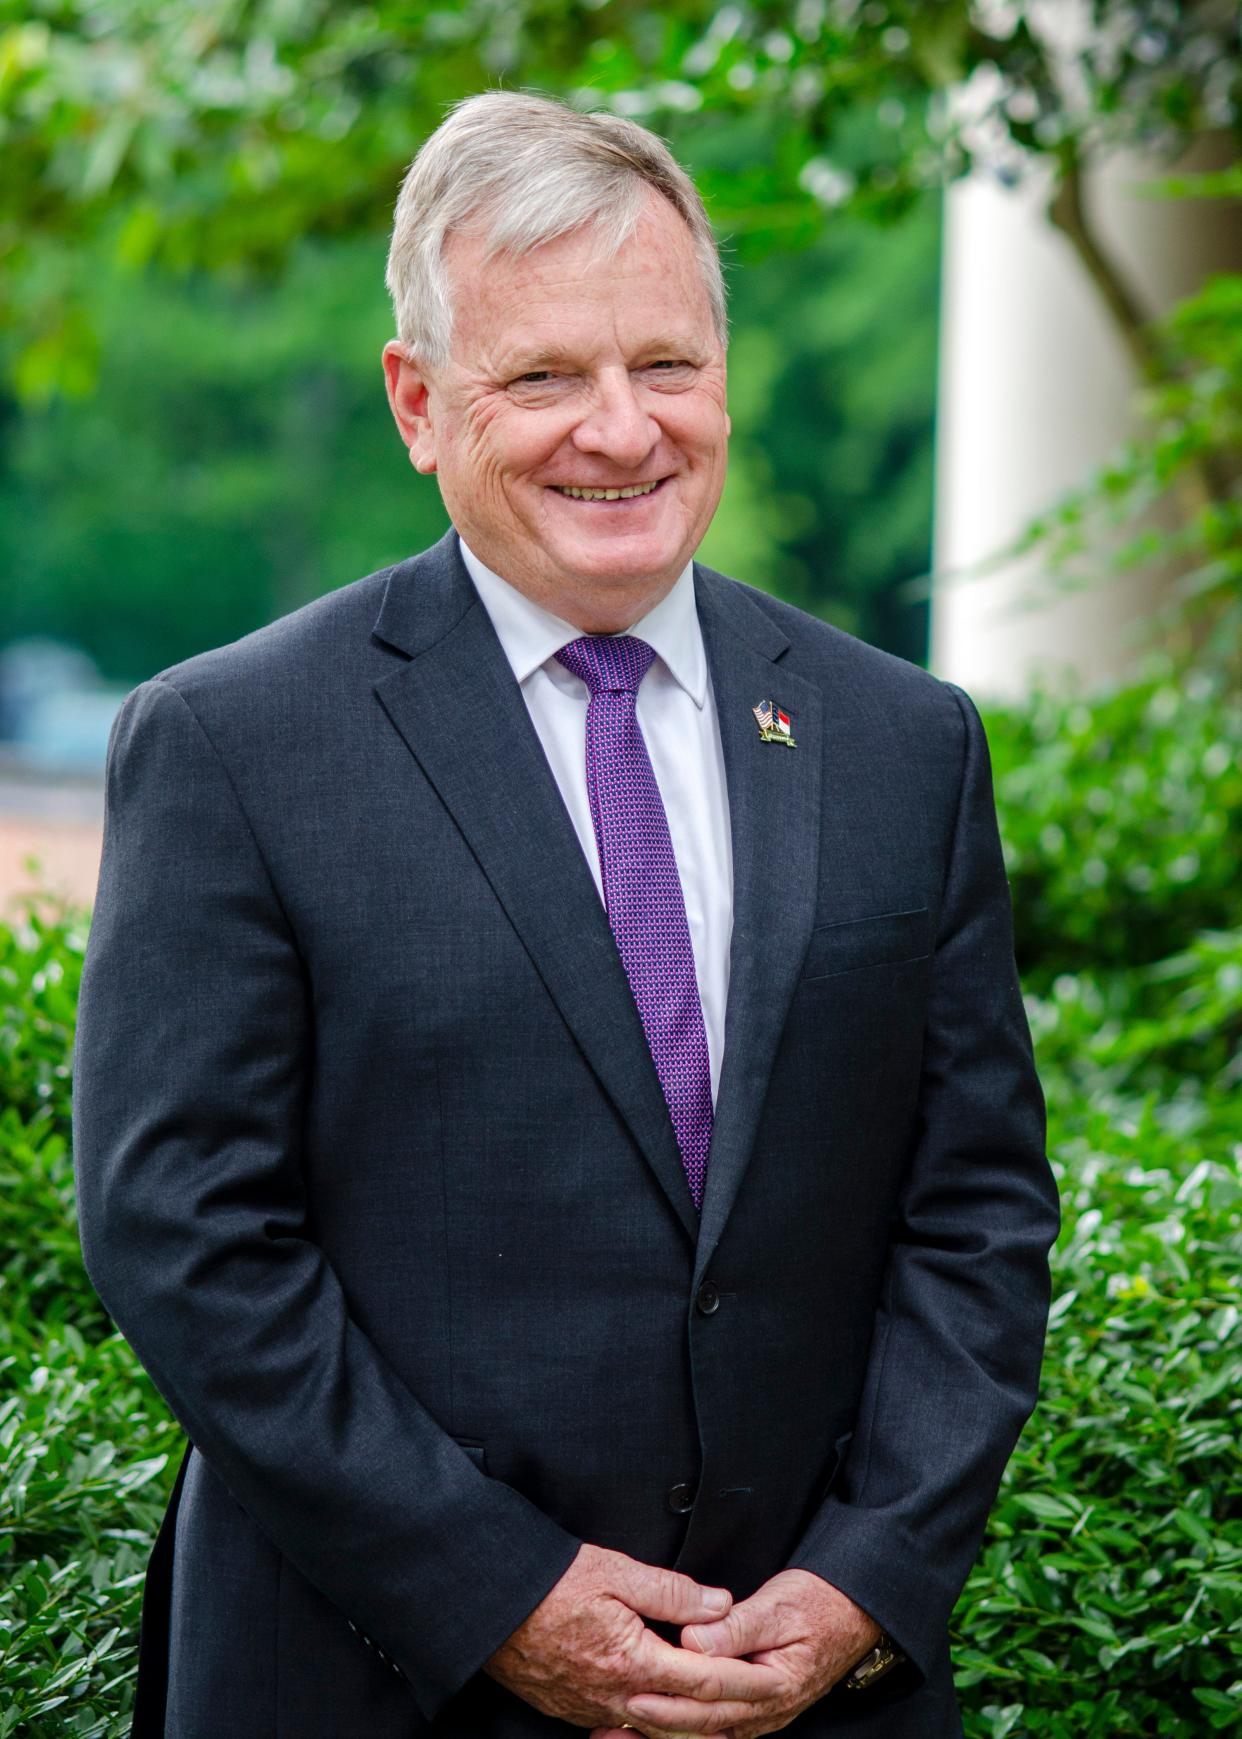 North Carolina Governor candidate Dale Folwell